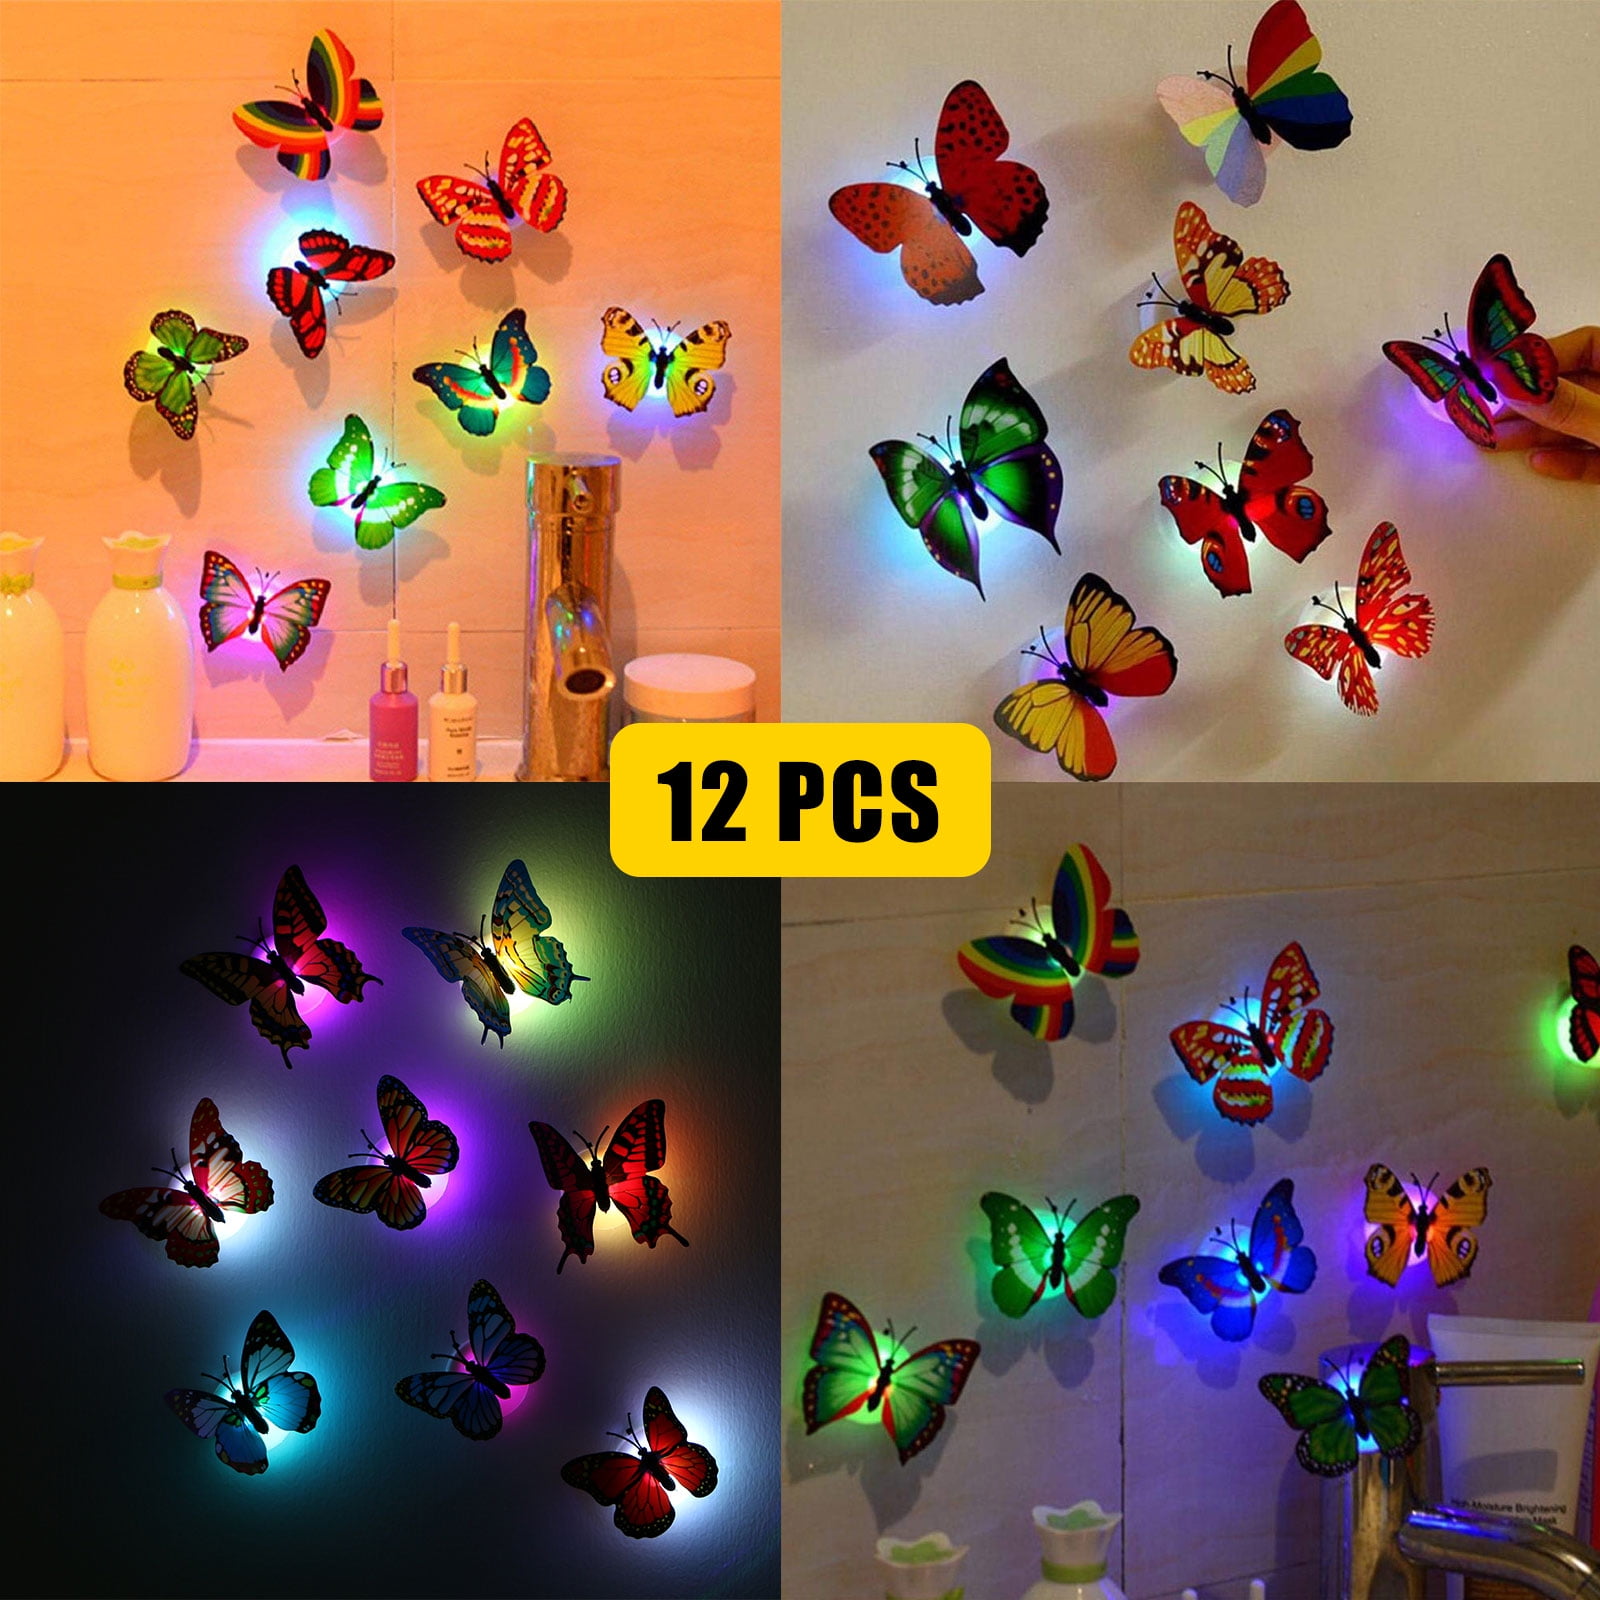 3D Butterfly Wall Stickers Luminous Glow Bedroom Living Decals House Decorations 